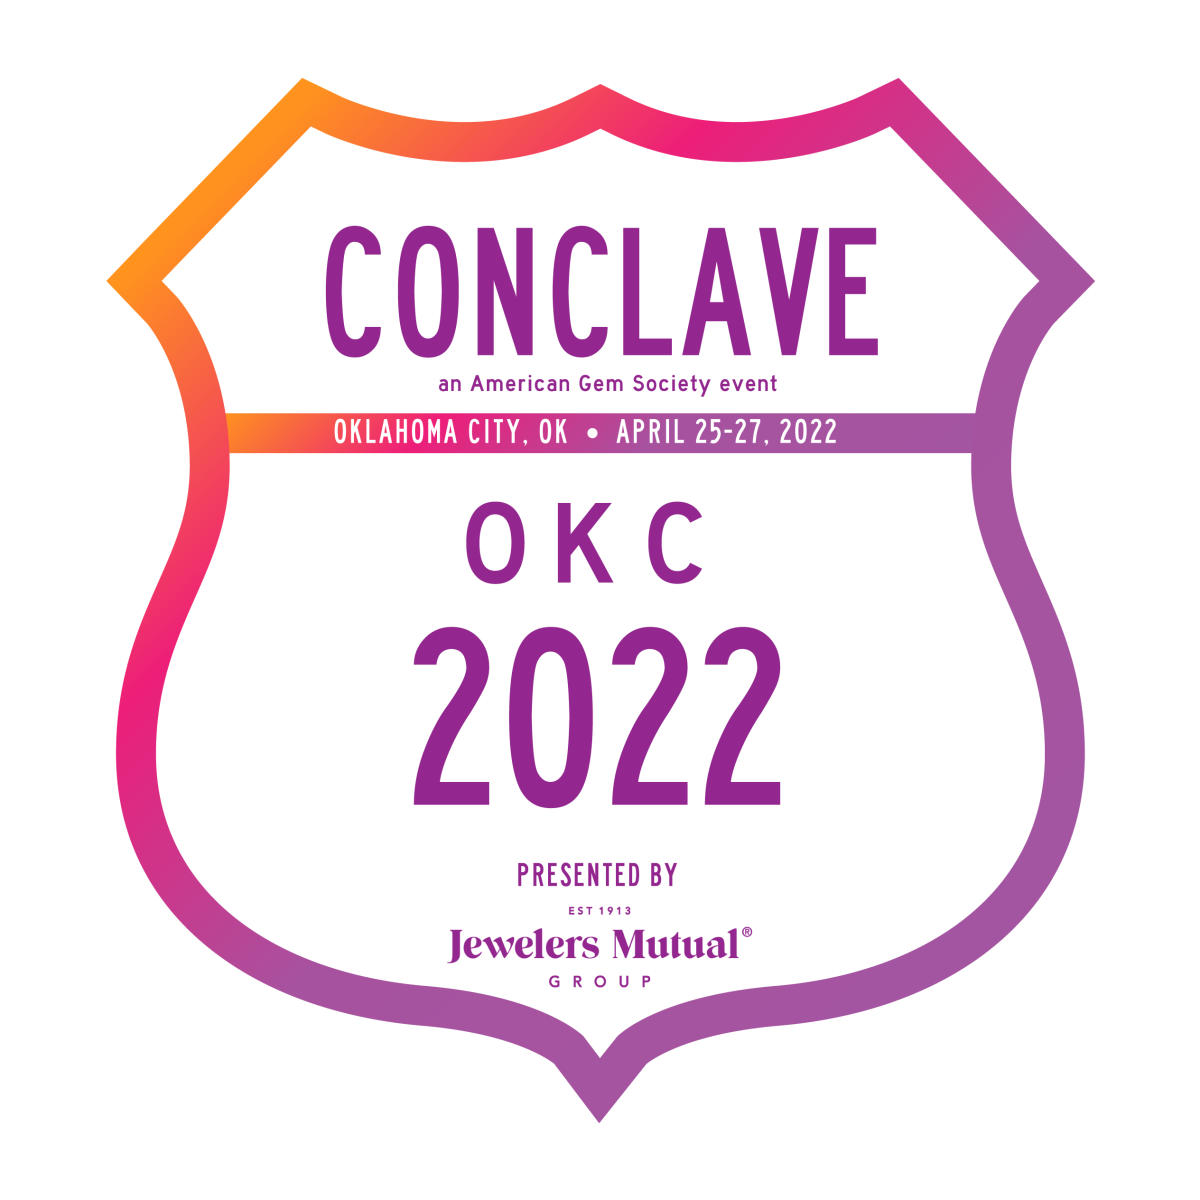 Conclave 2022 in OKC